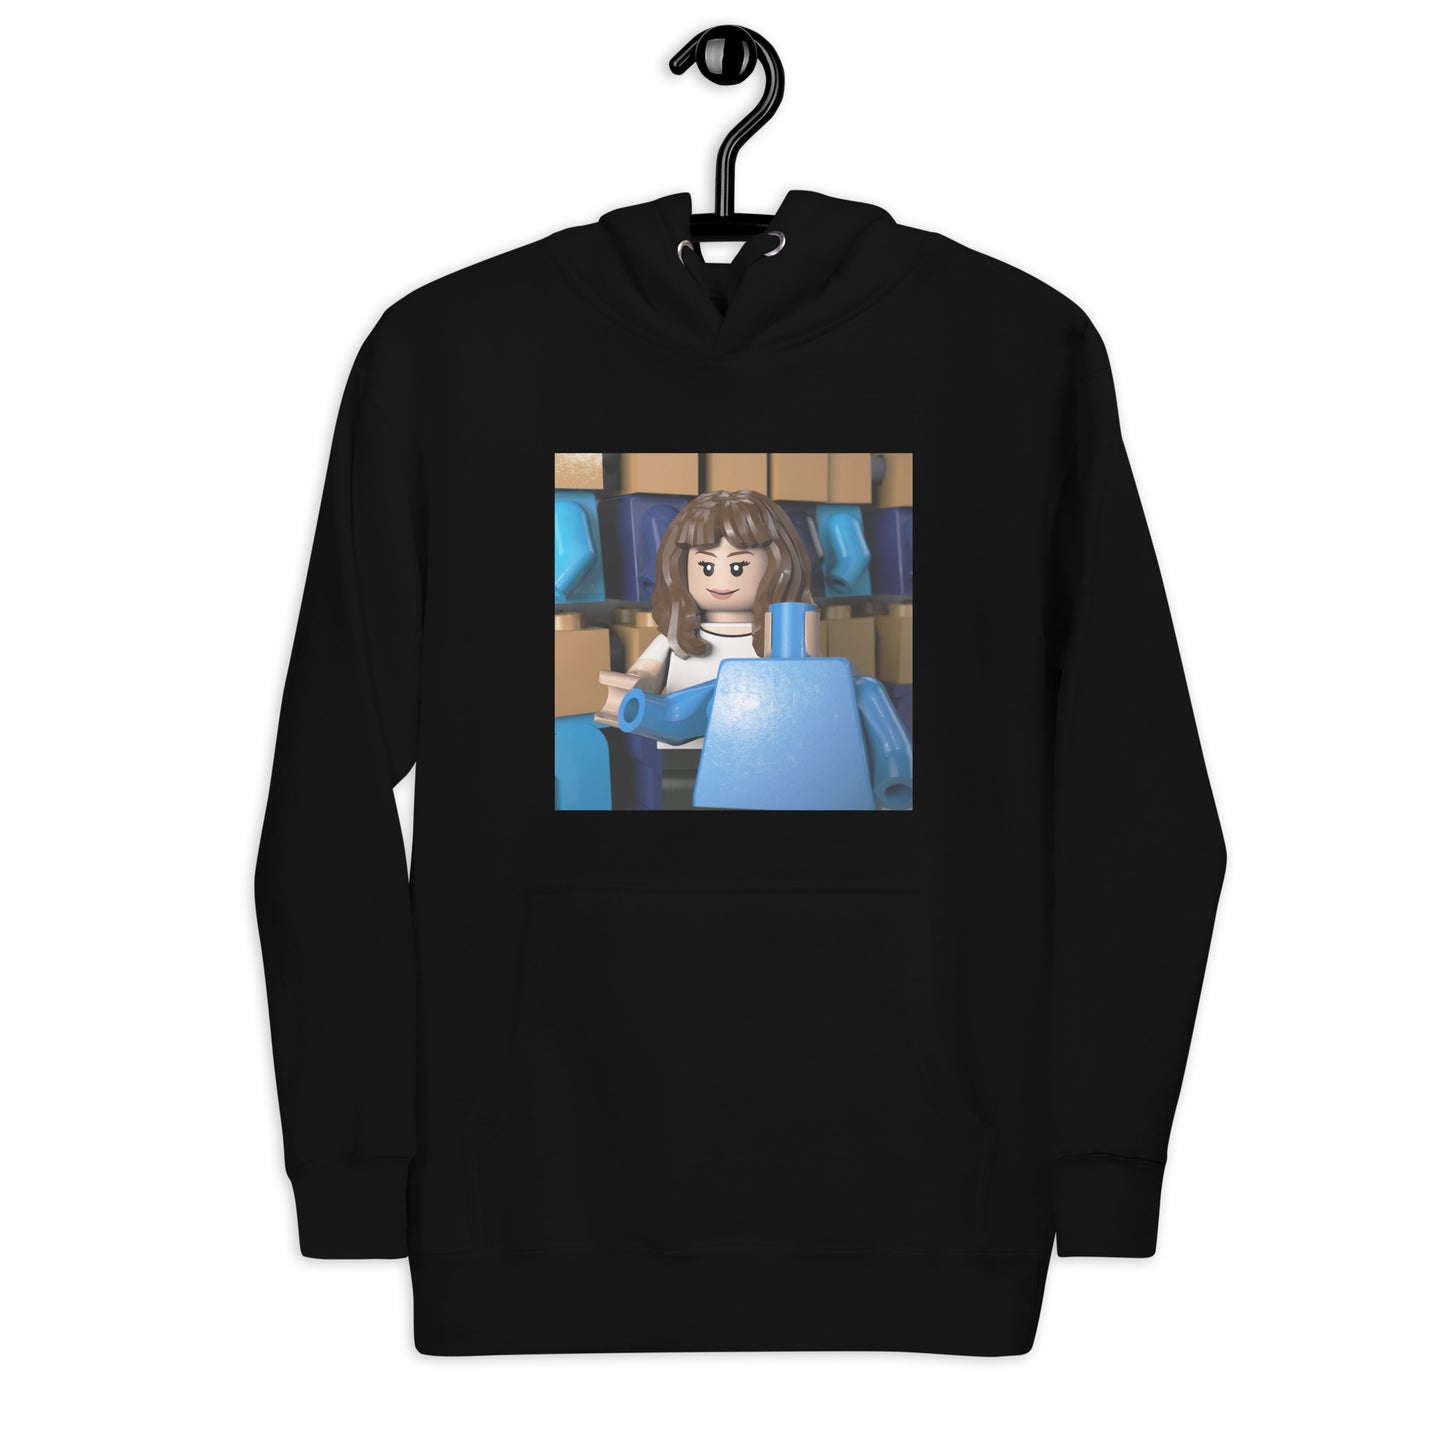 "Faye Webster - Underdressed at the Symphony" Lego Parody Hoodie